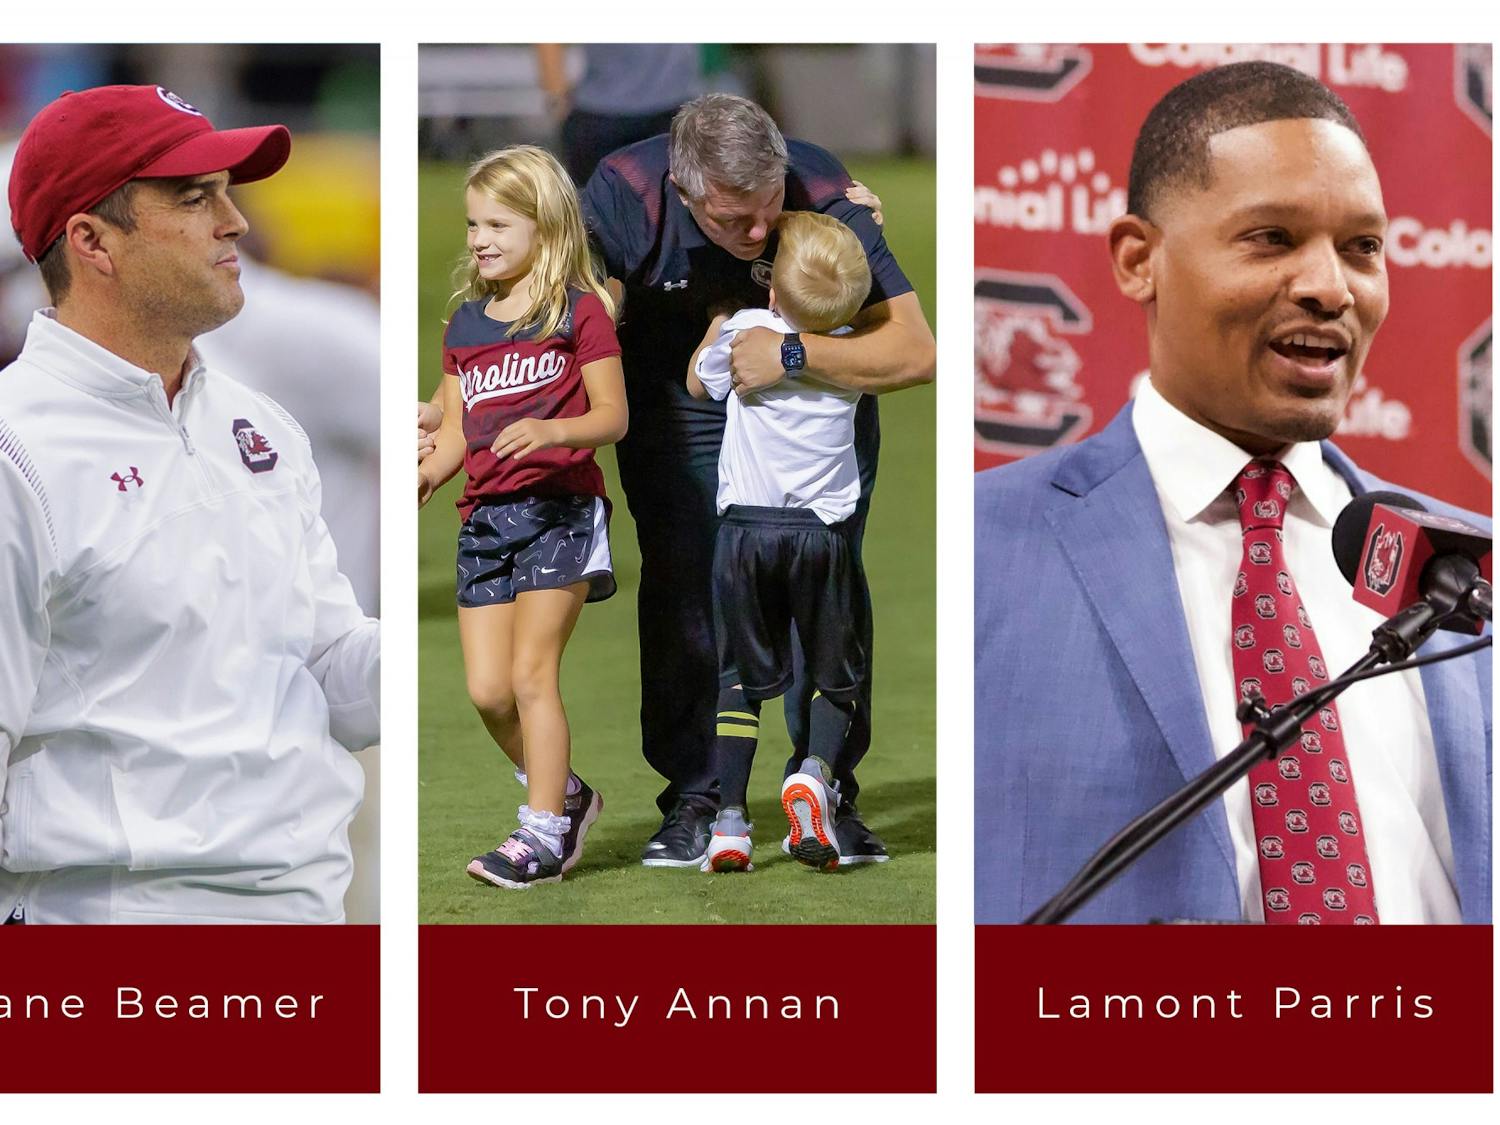 South Carolina head football coach Shane Beamer, new men's head basketball coach Lamont Paris and men's head soccer coach Tony Annan. All three coaches are new to South Carolina and were hired within the last two years.